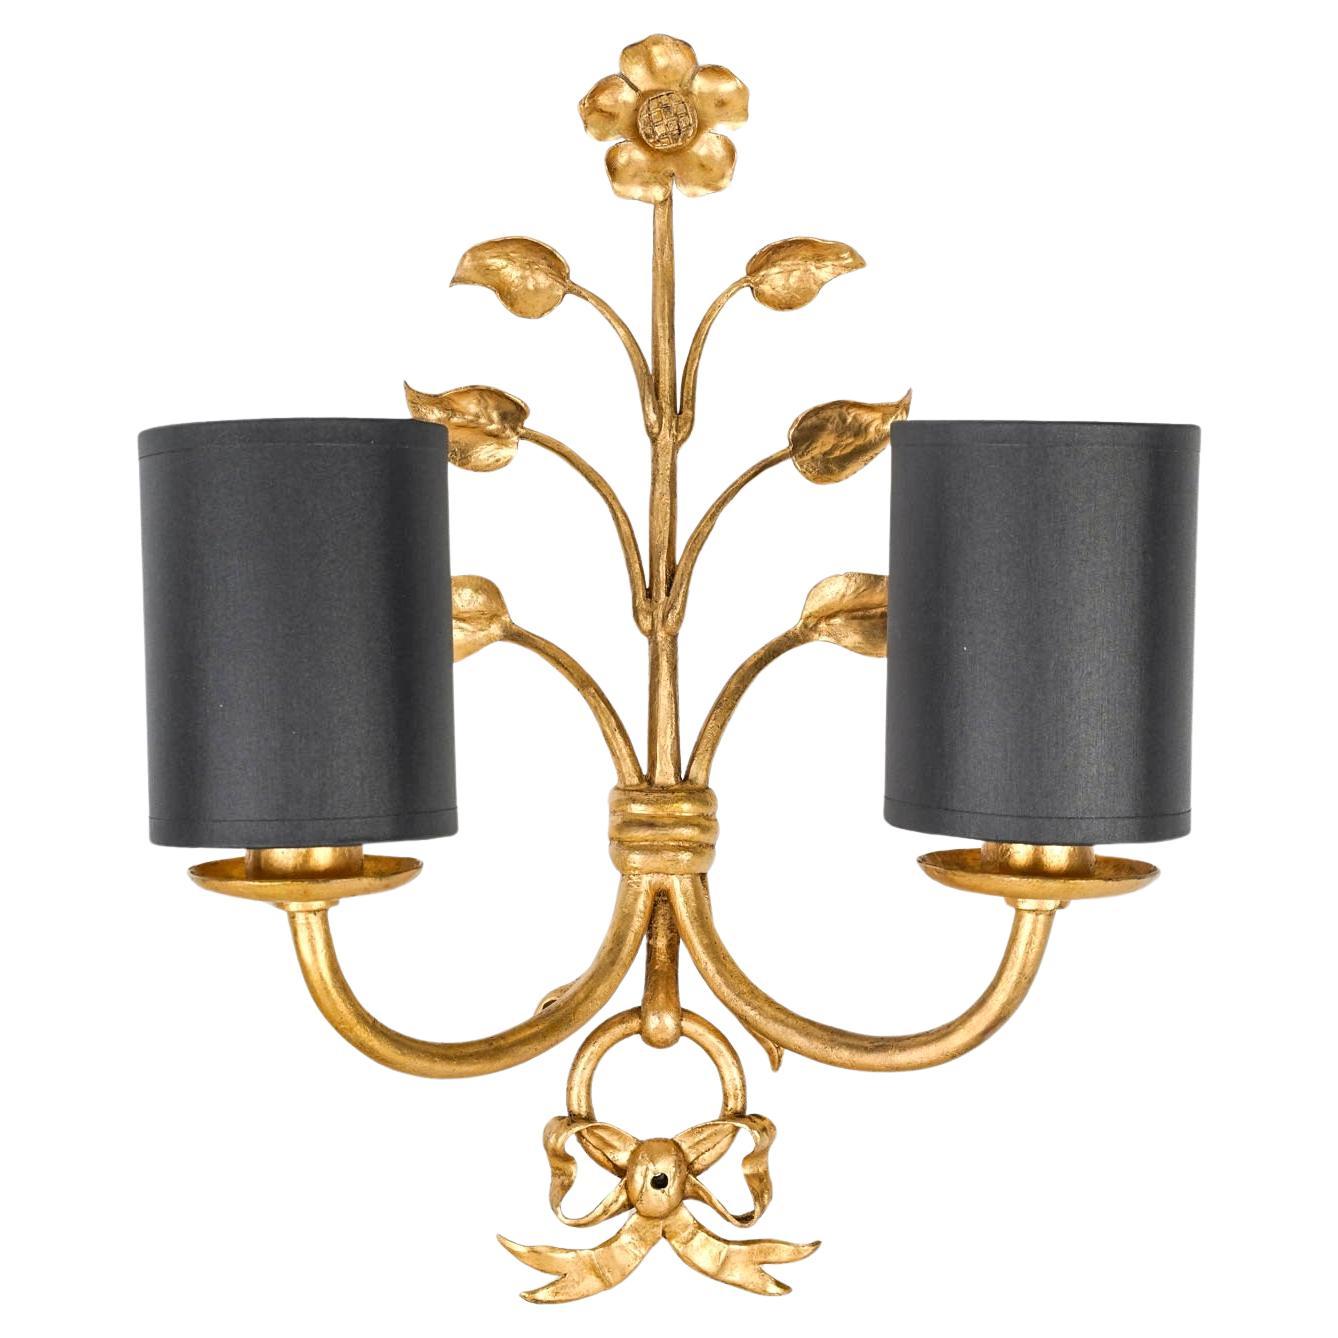 Composed of a central stem adorned with a flower at the top and branches embellished with leaves on either side of the sconce.
Two arms of light rise from the lower part of the sconce and are clad with cylindrical black cotton shades highlighted by